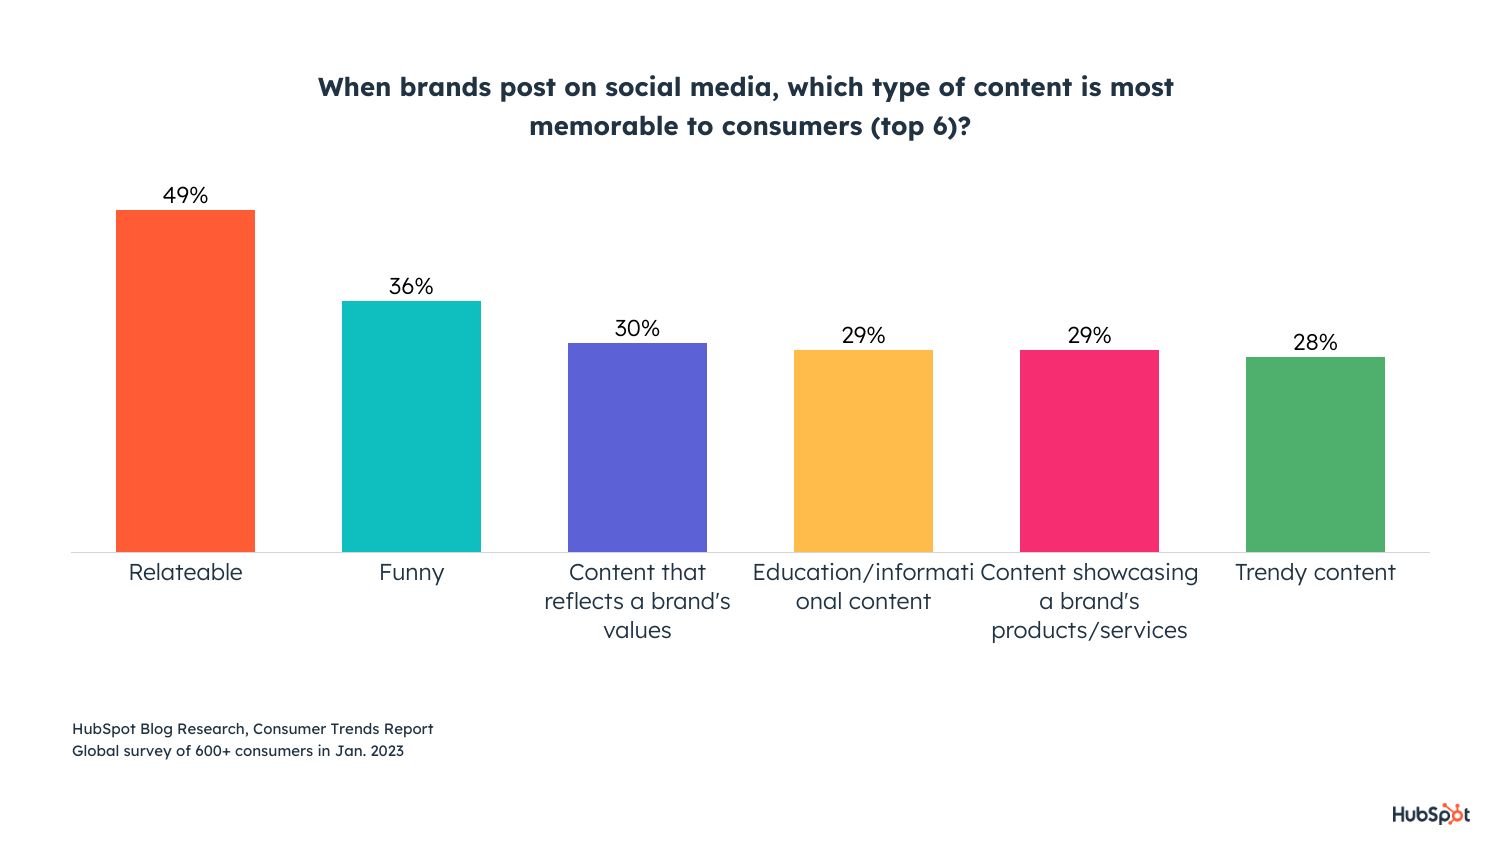 Relevant content is most memorable for consumers